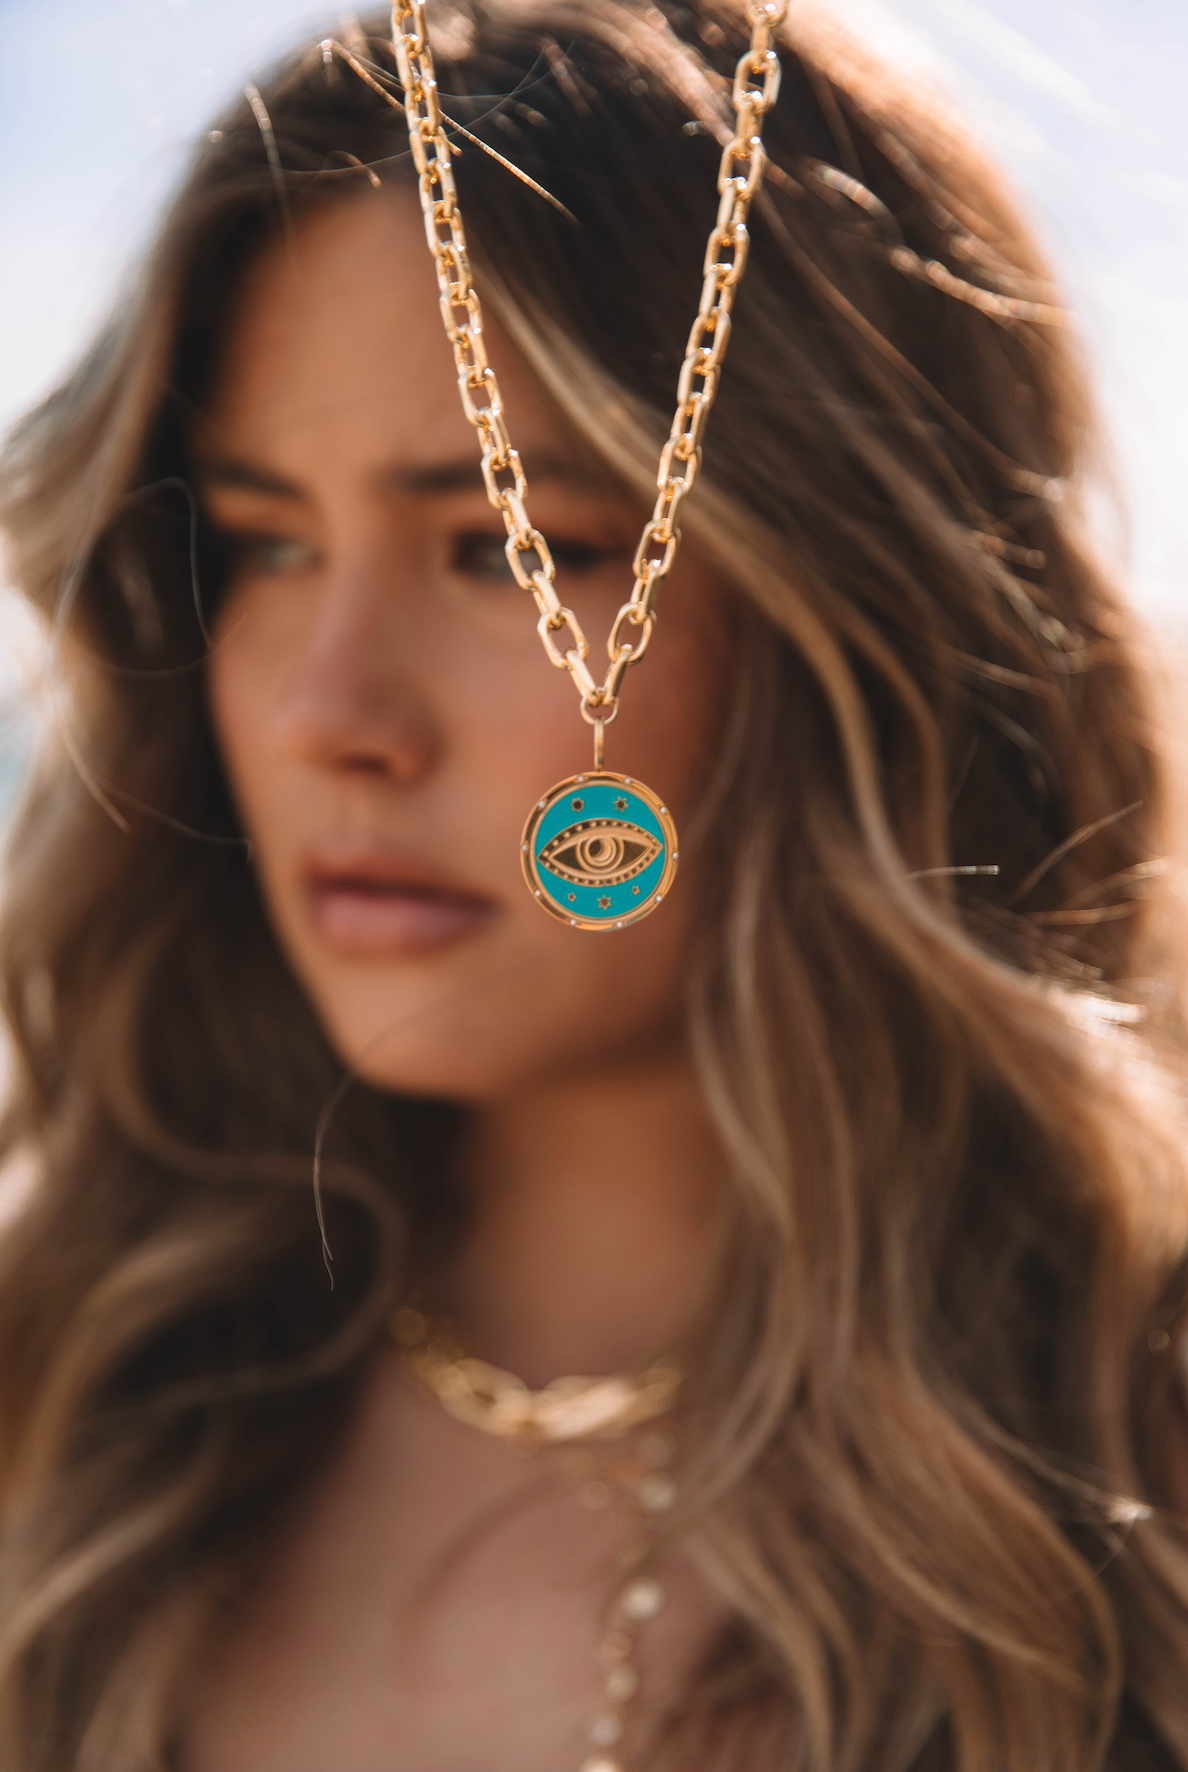 The Dreamy Turquoise Eye Necklace